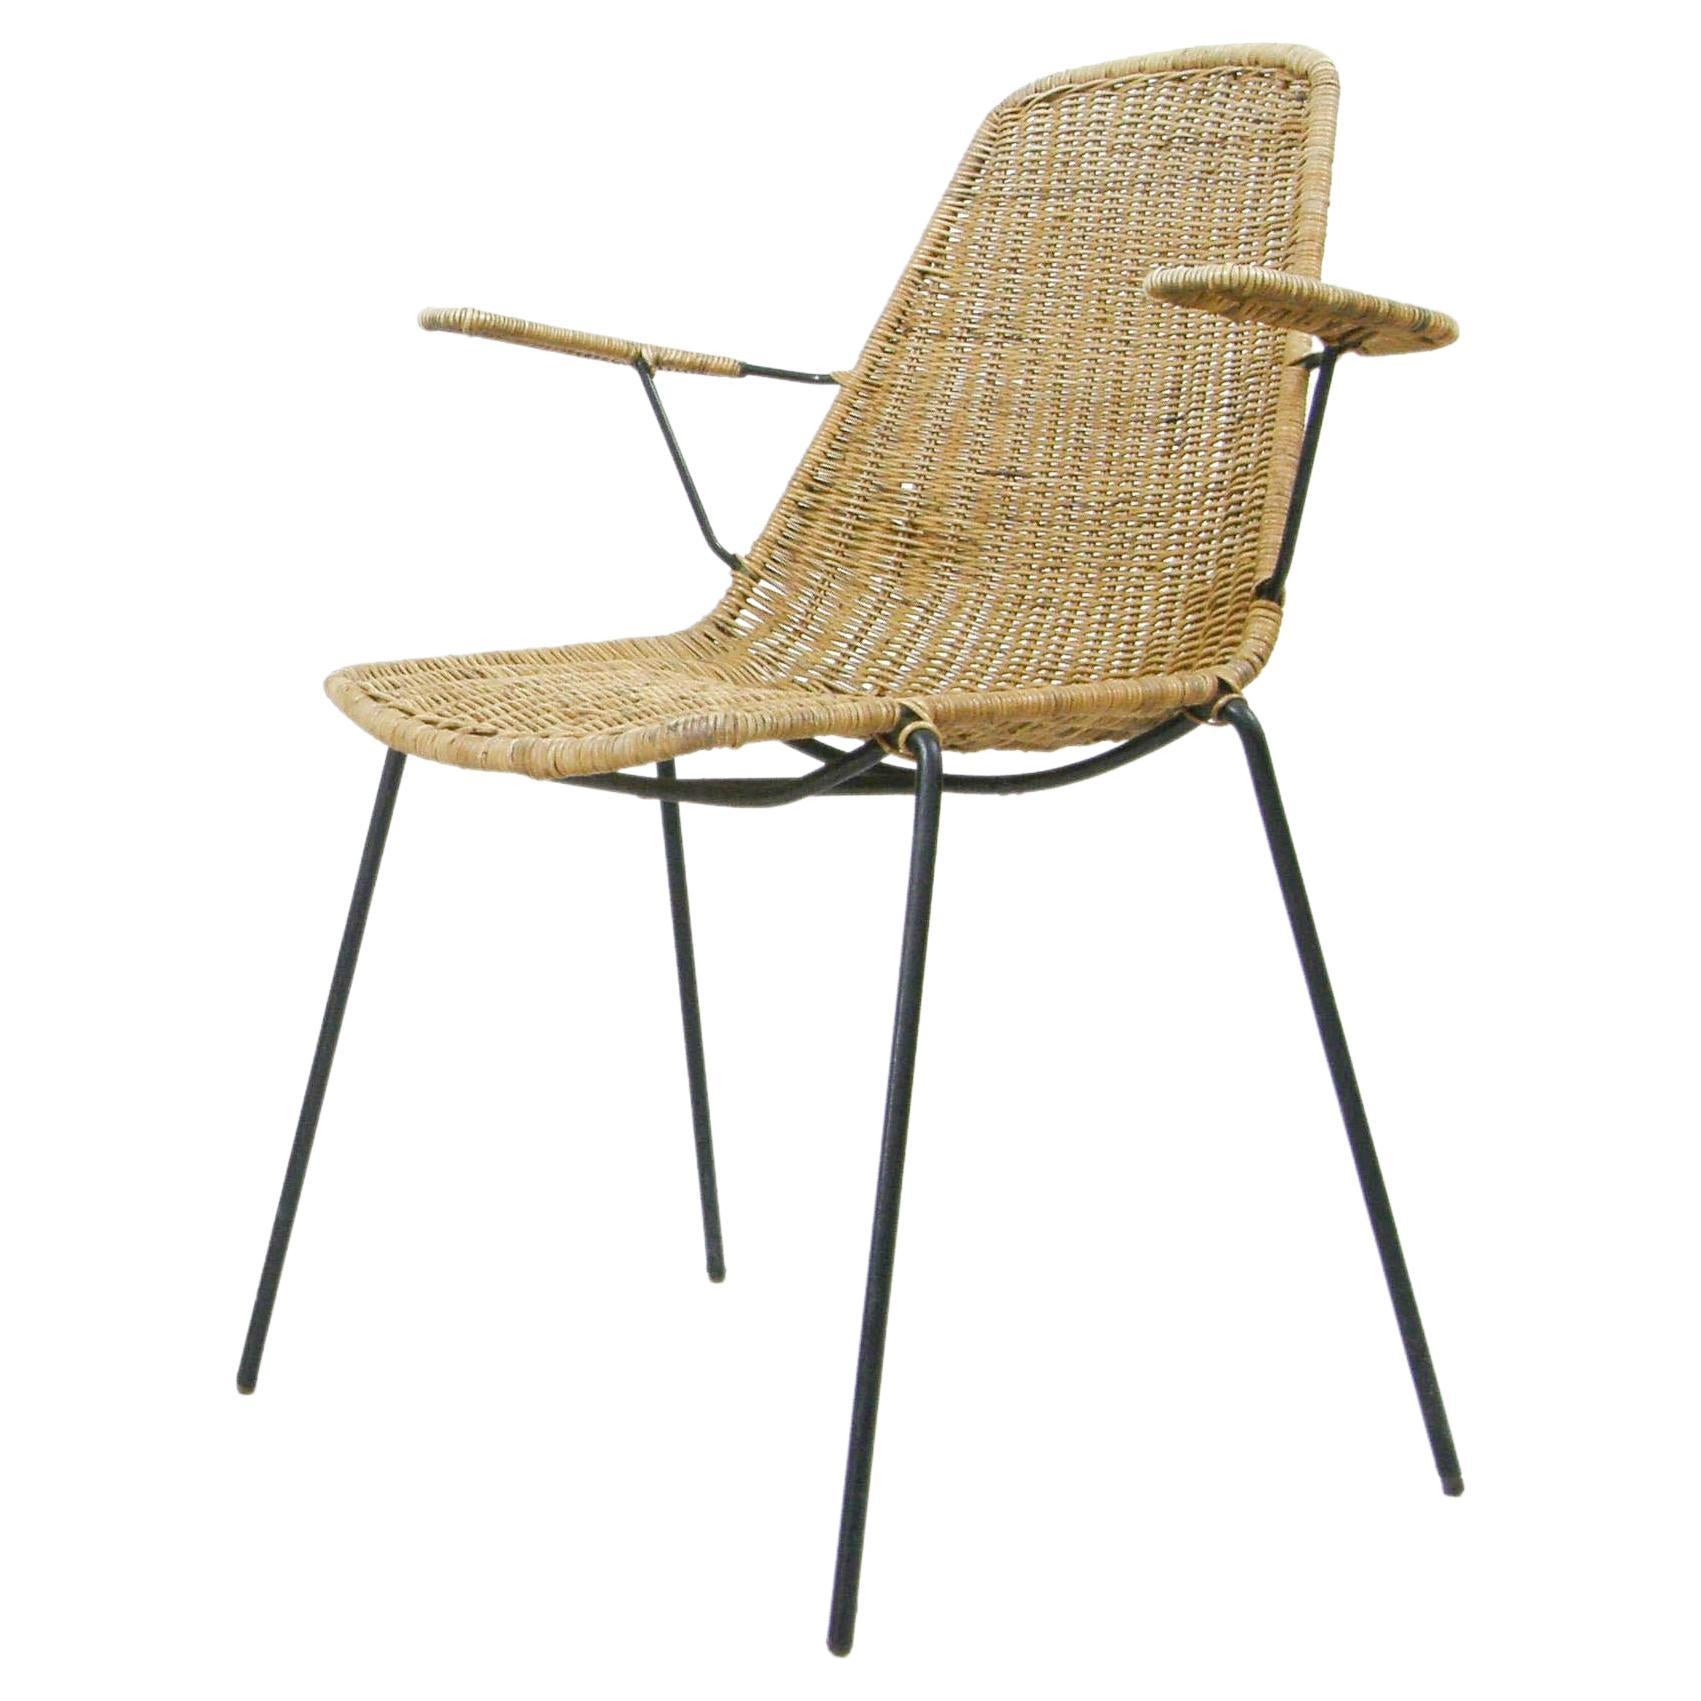 Wicker chair with armrests Campo and Graffi italia 1950s For Sale